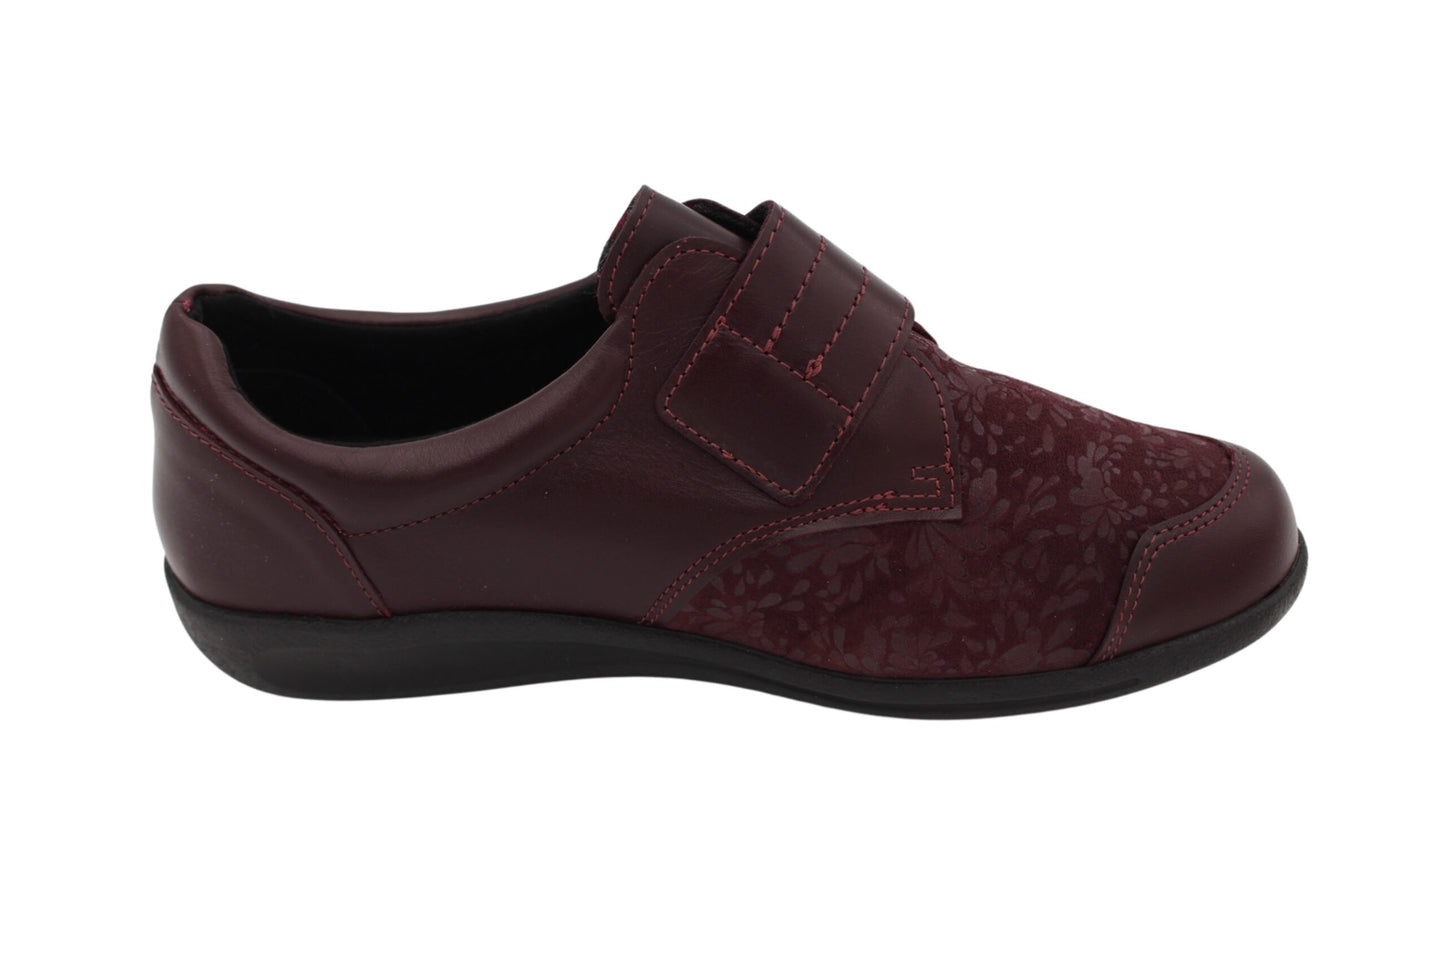 DB Shoes Shoes  Burgundy leather flower